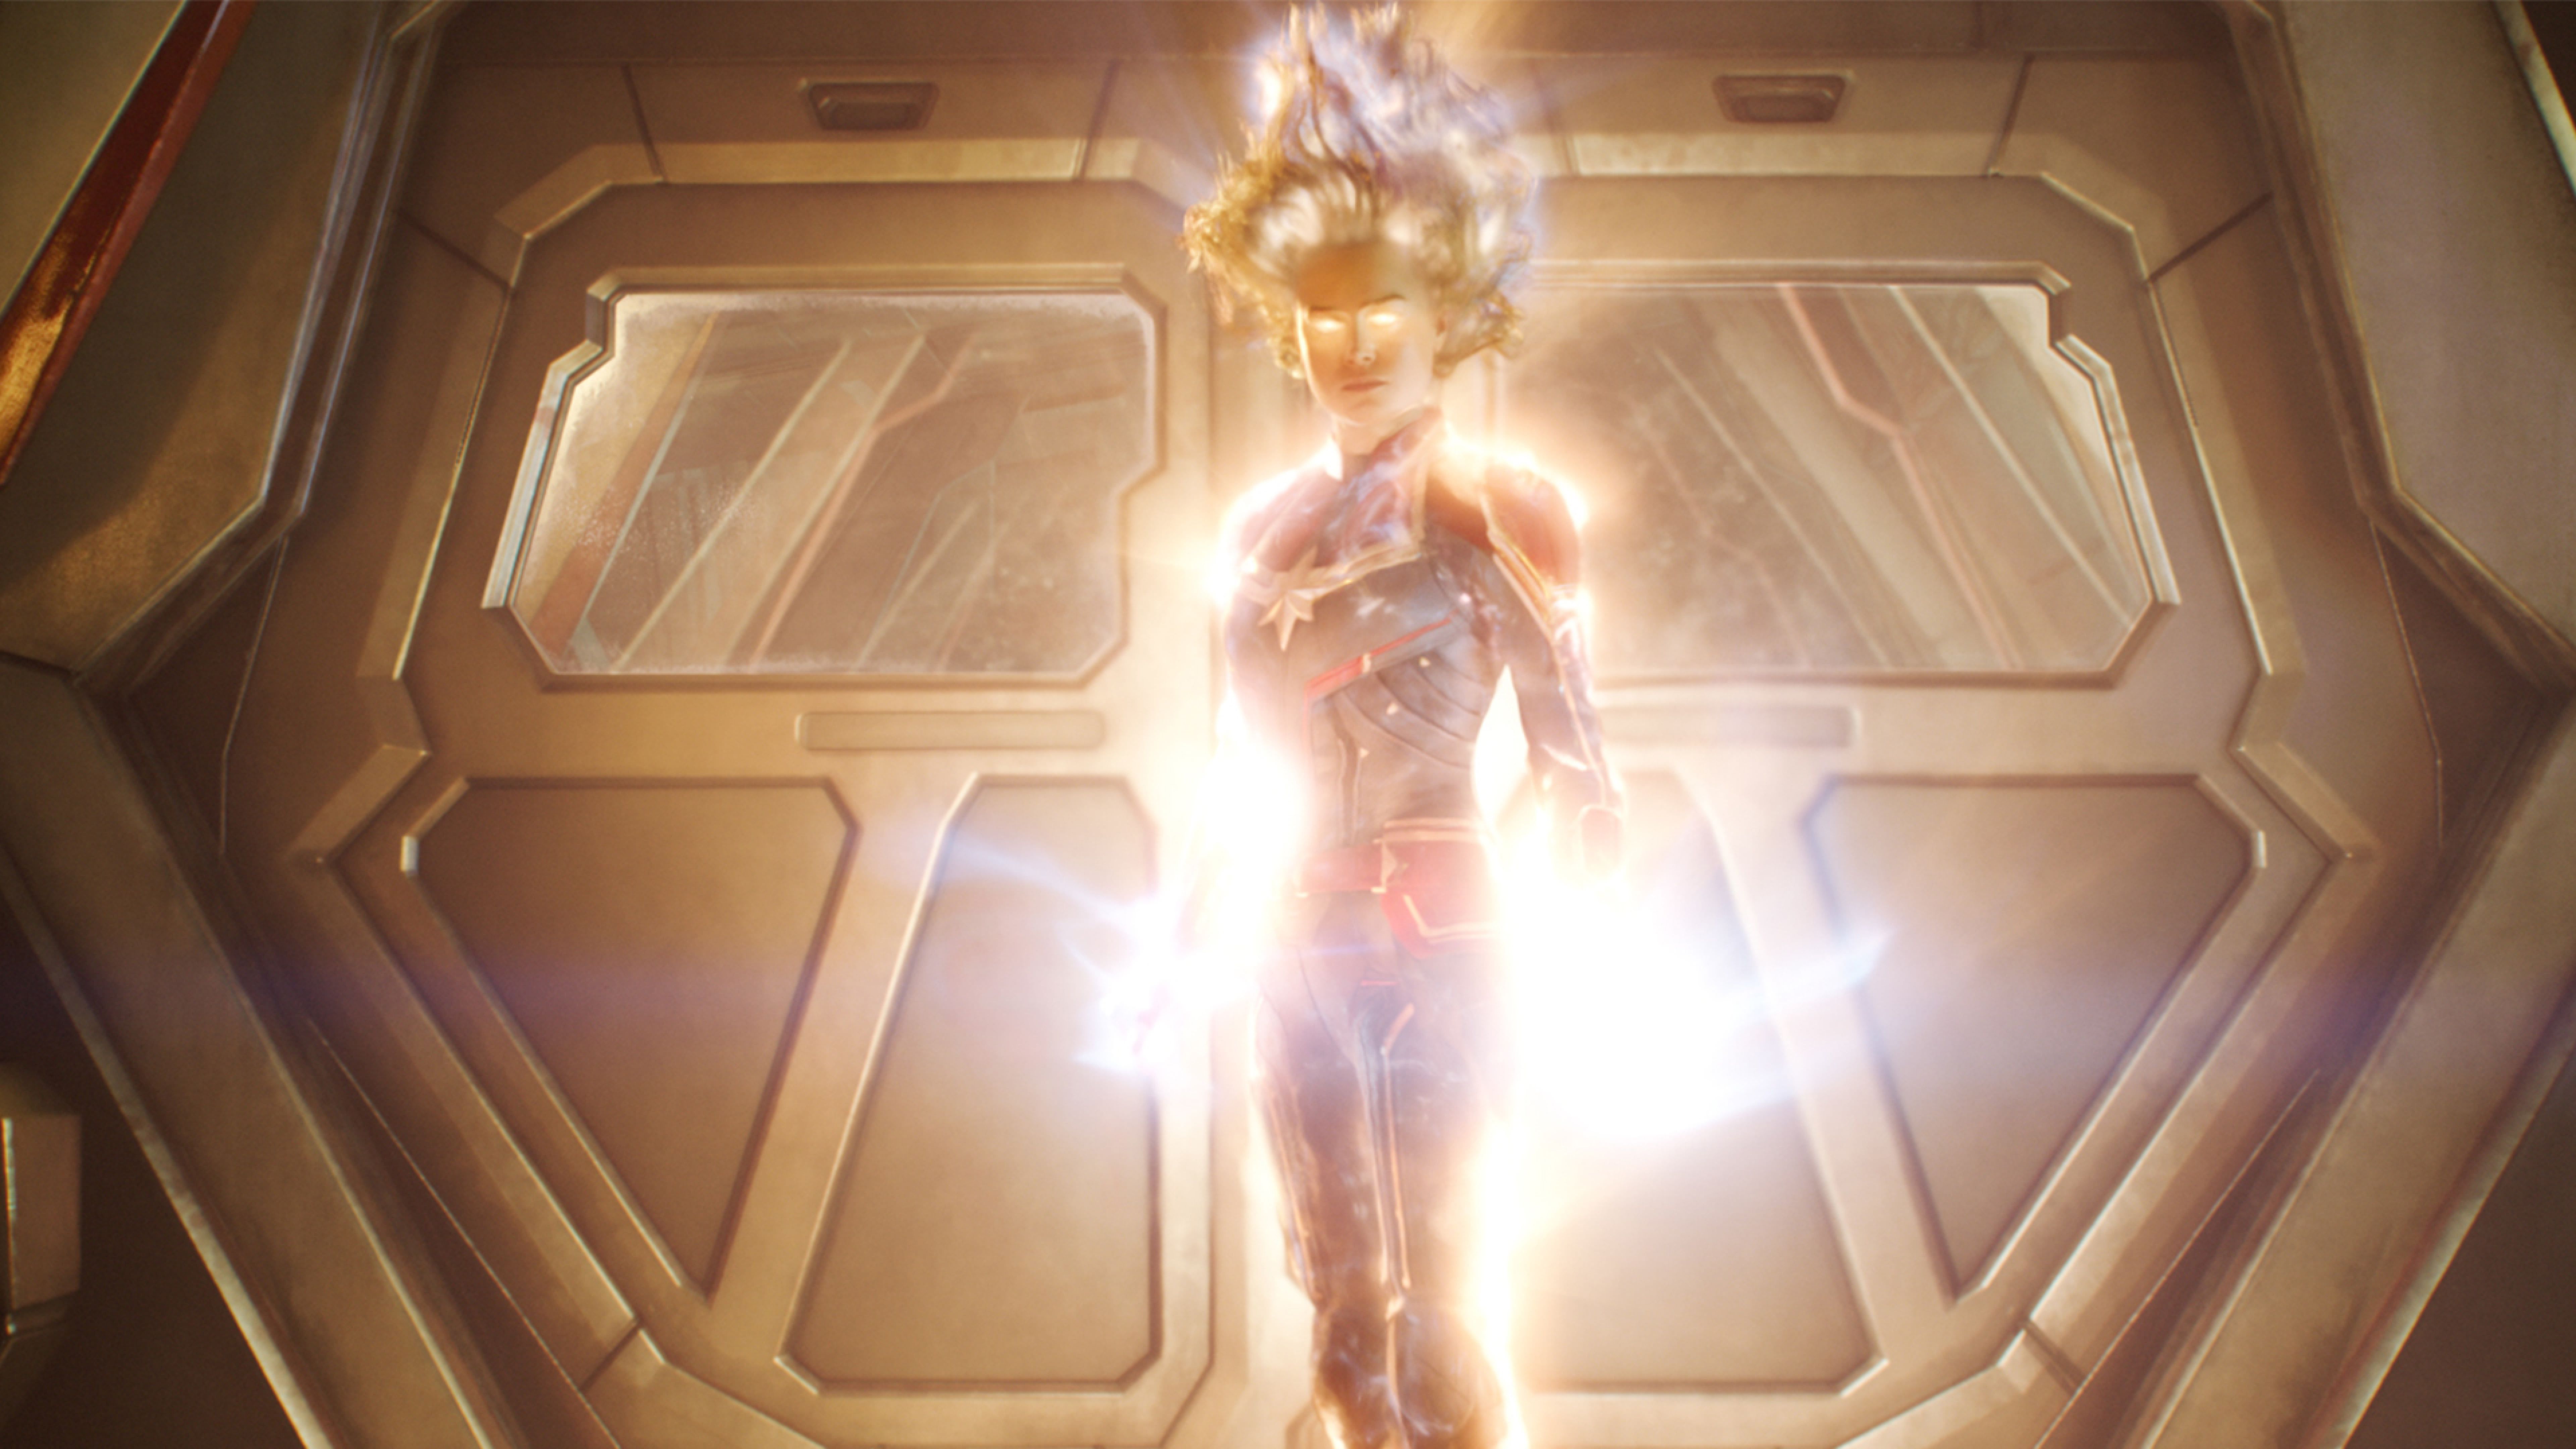 Captain Marvel Super Power 8K Wallpaper, HD Movies 4K Wallpaper, Image, Photo and Background